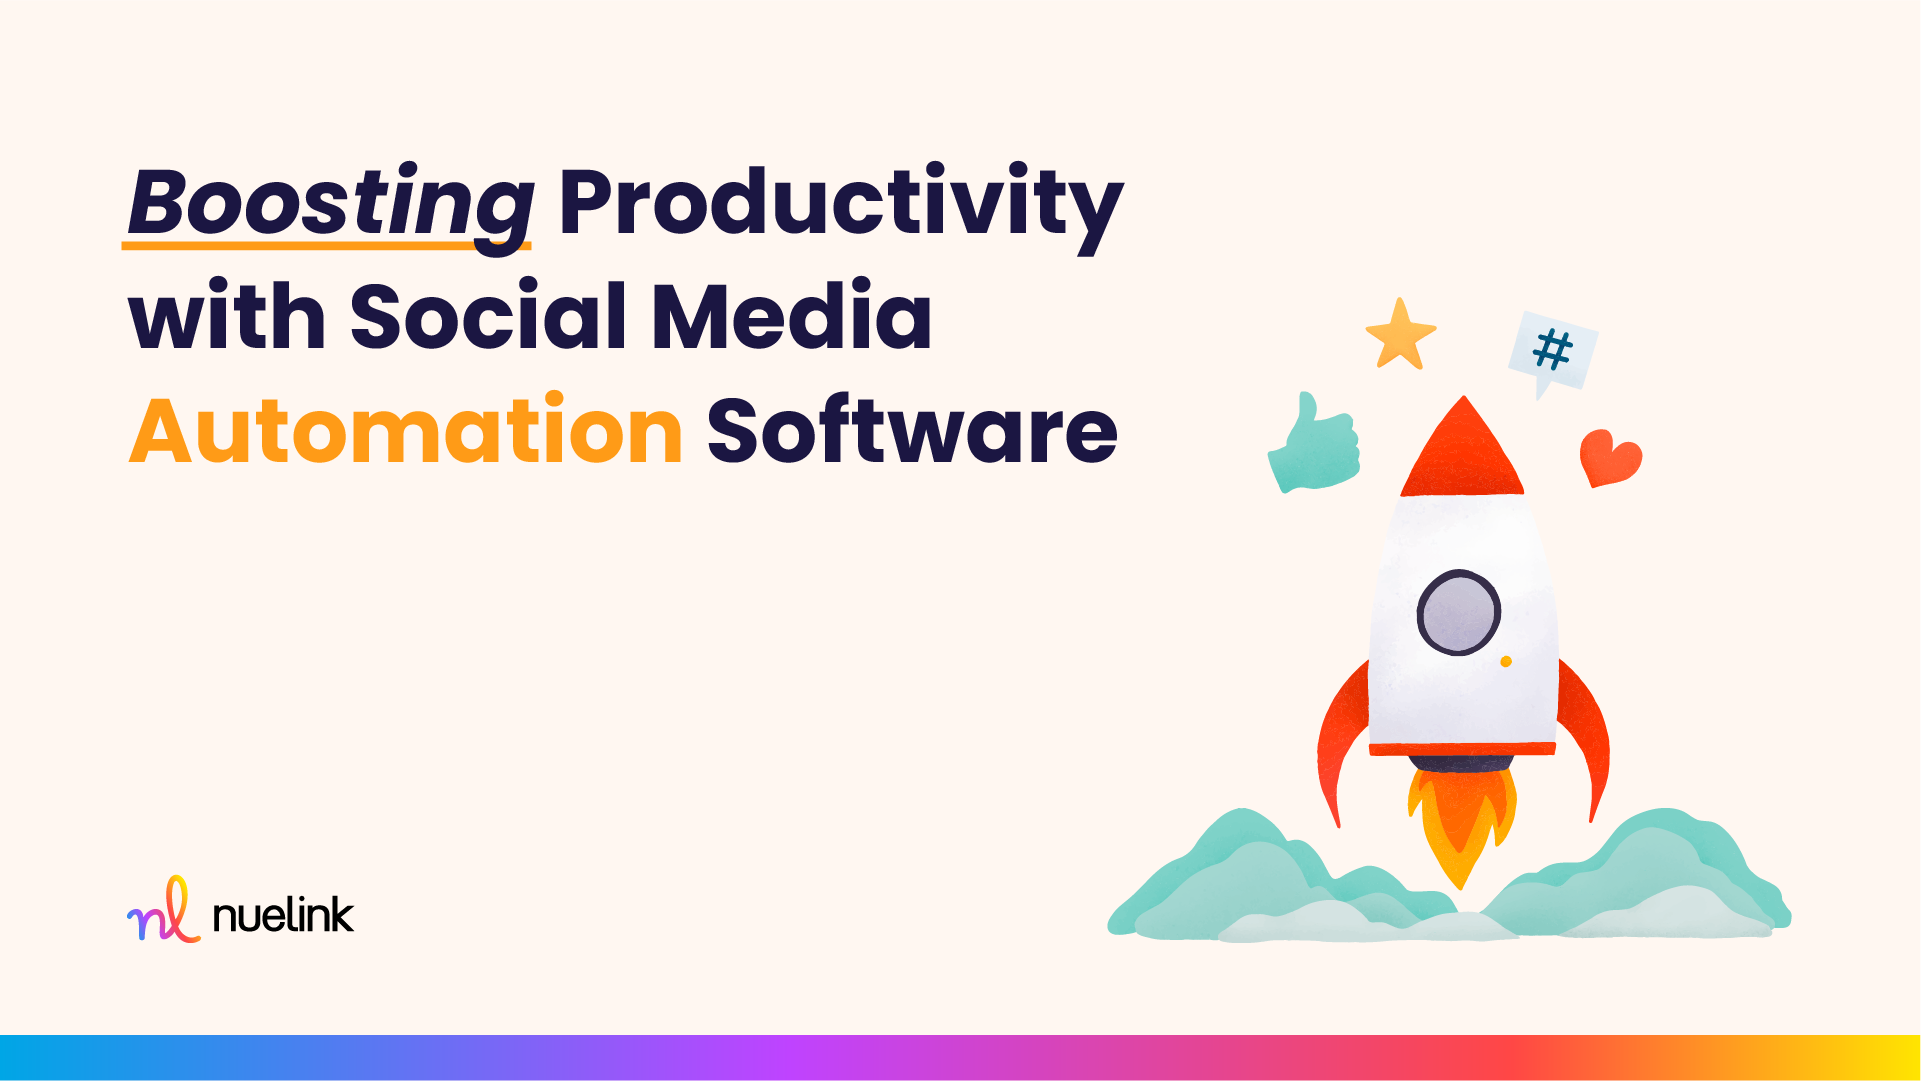 Social media automation software